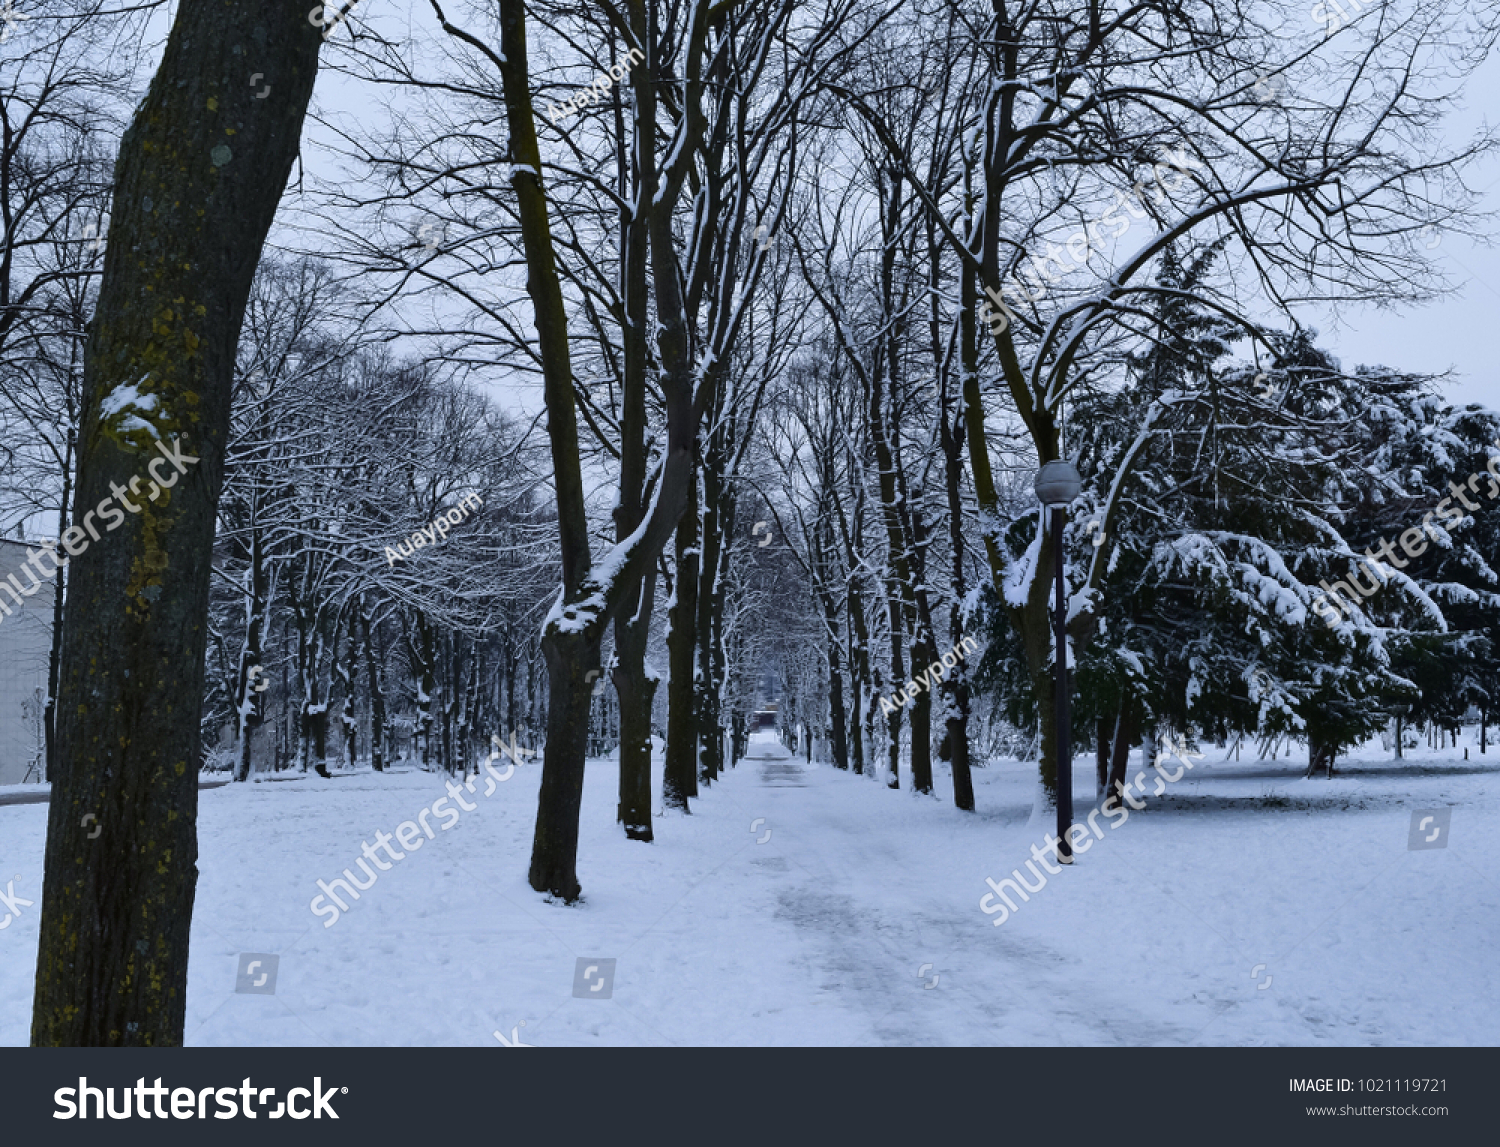 Winter Arrived Snowing Snowfall Forest Garden Stock Photo Edit